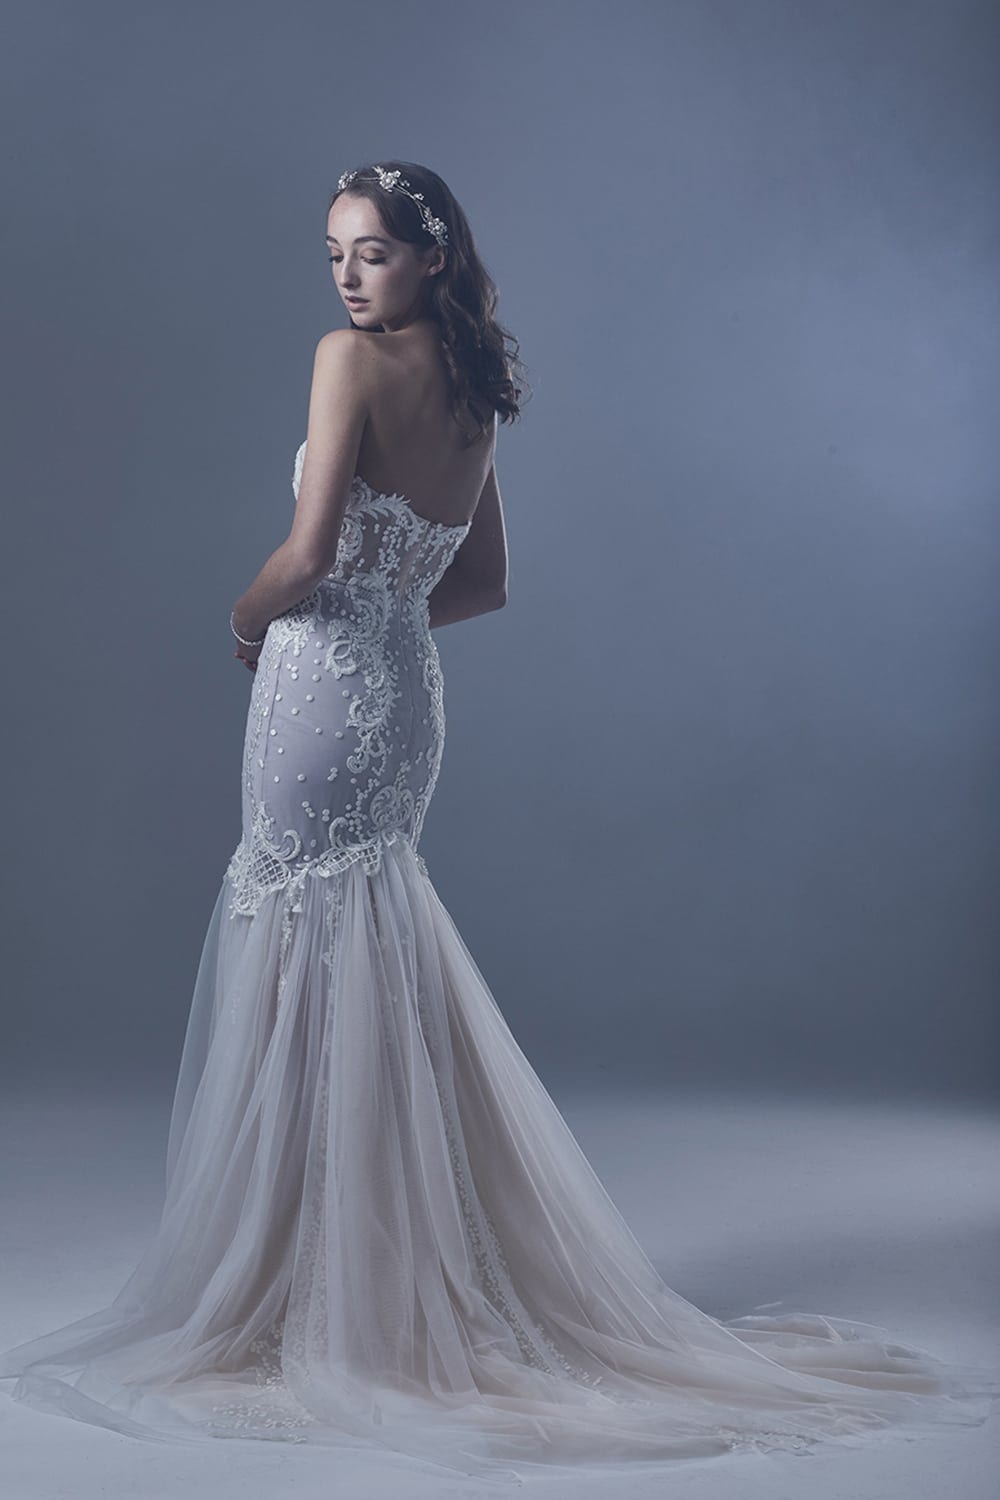 Shop For Jessica Couture - GWYNNETH – Jessica Bridal